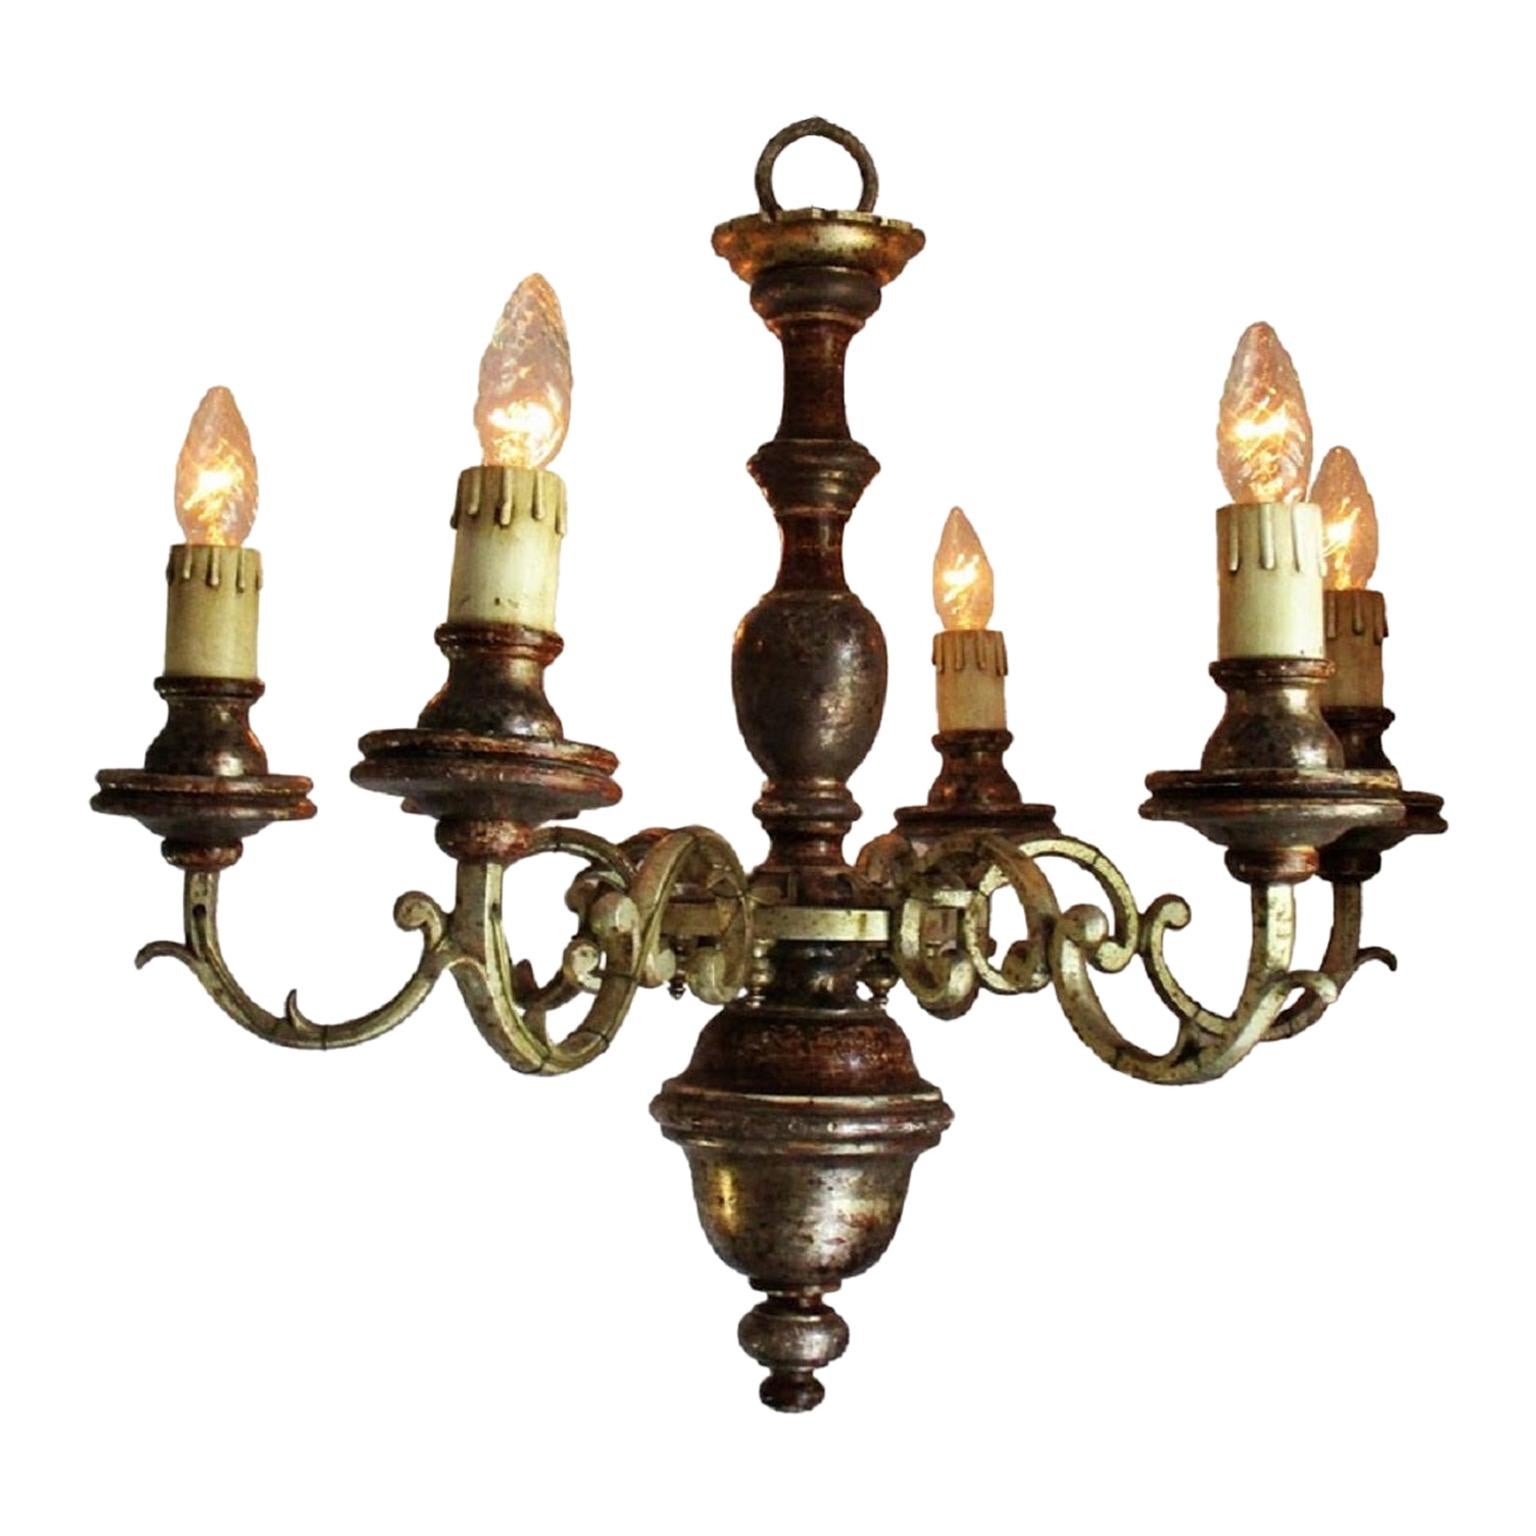 Rustic Italian 19th Century Painted Silver Gilt Iron 6-Arm Chandelier